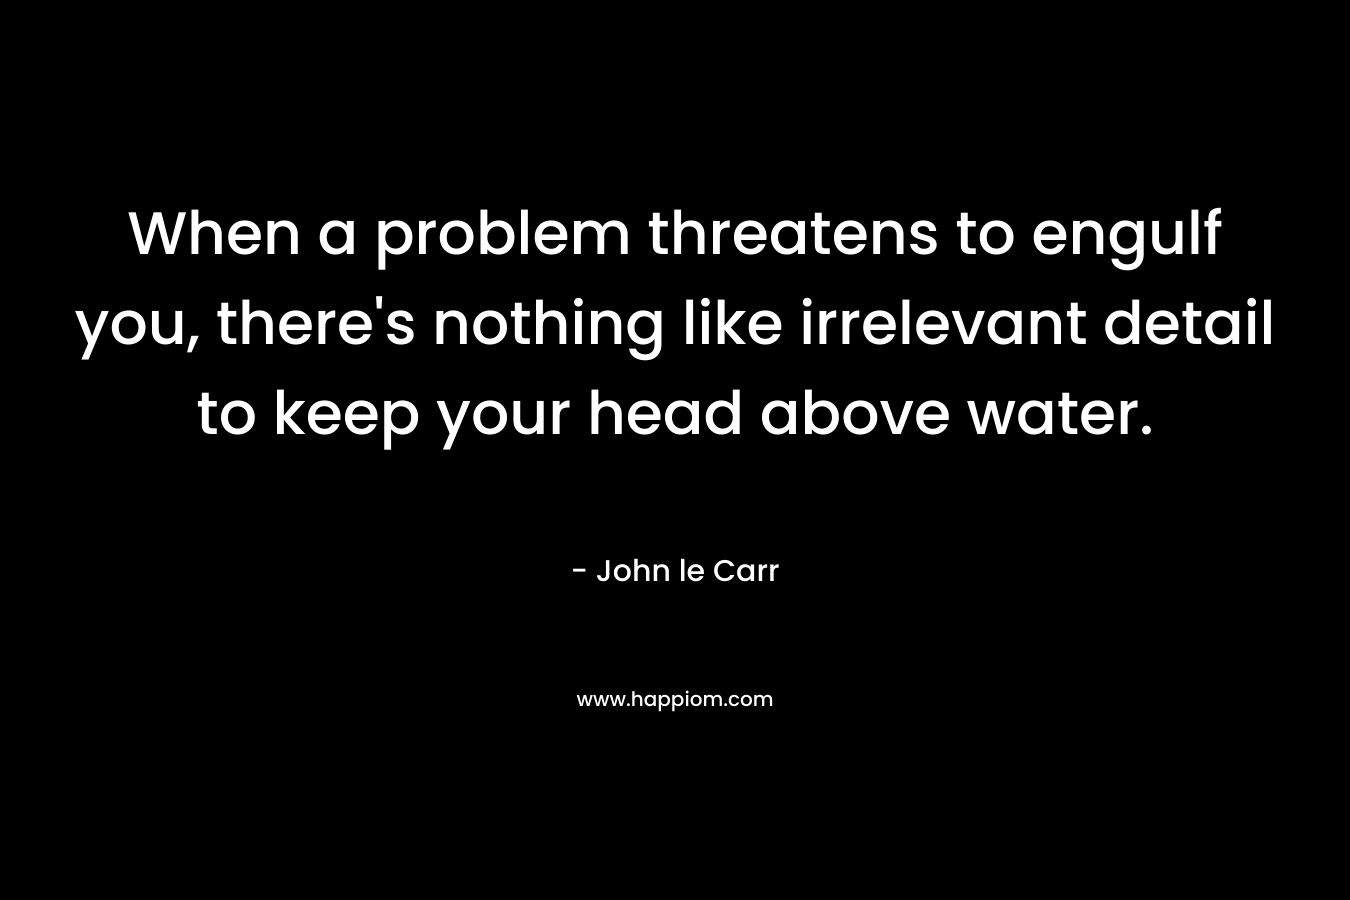 When a problem threatens to engulf you, there's nothing like irrelevant detail to keep your head above water.